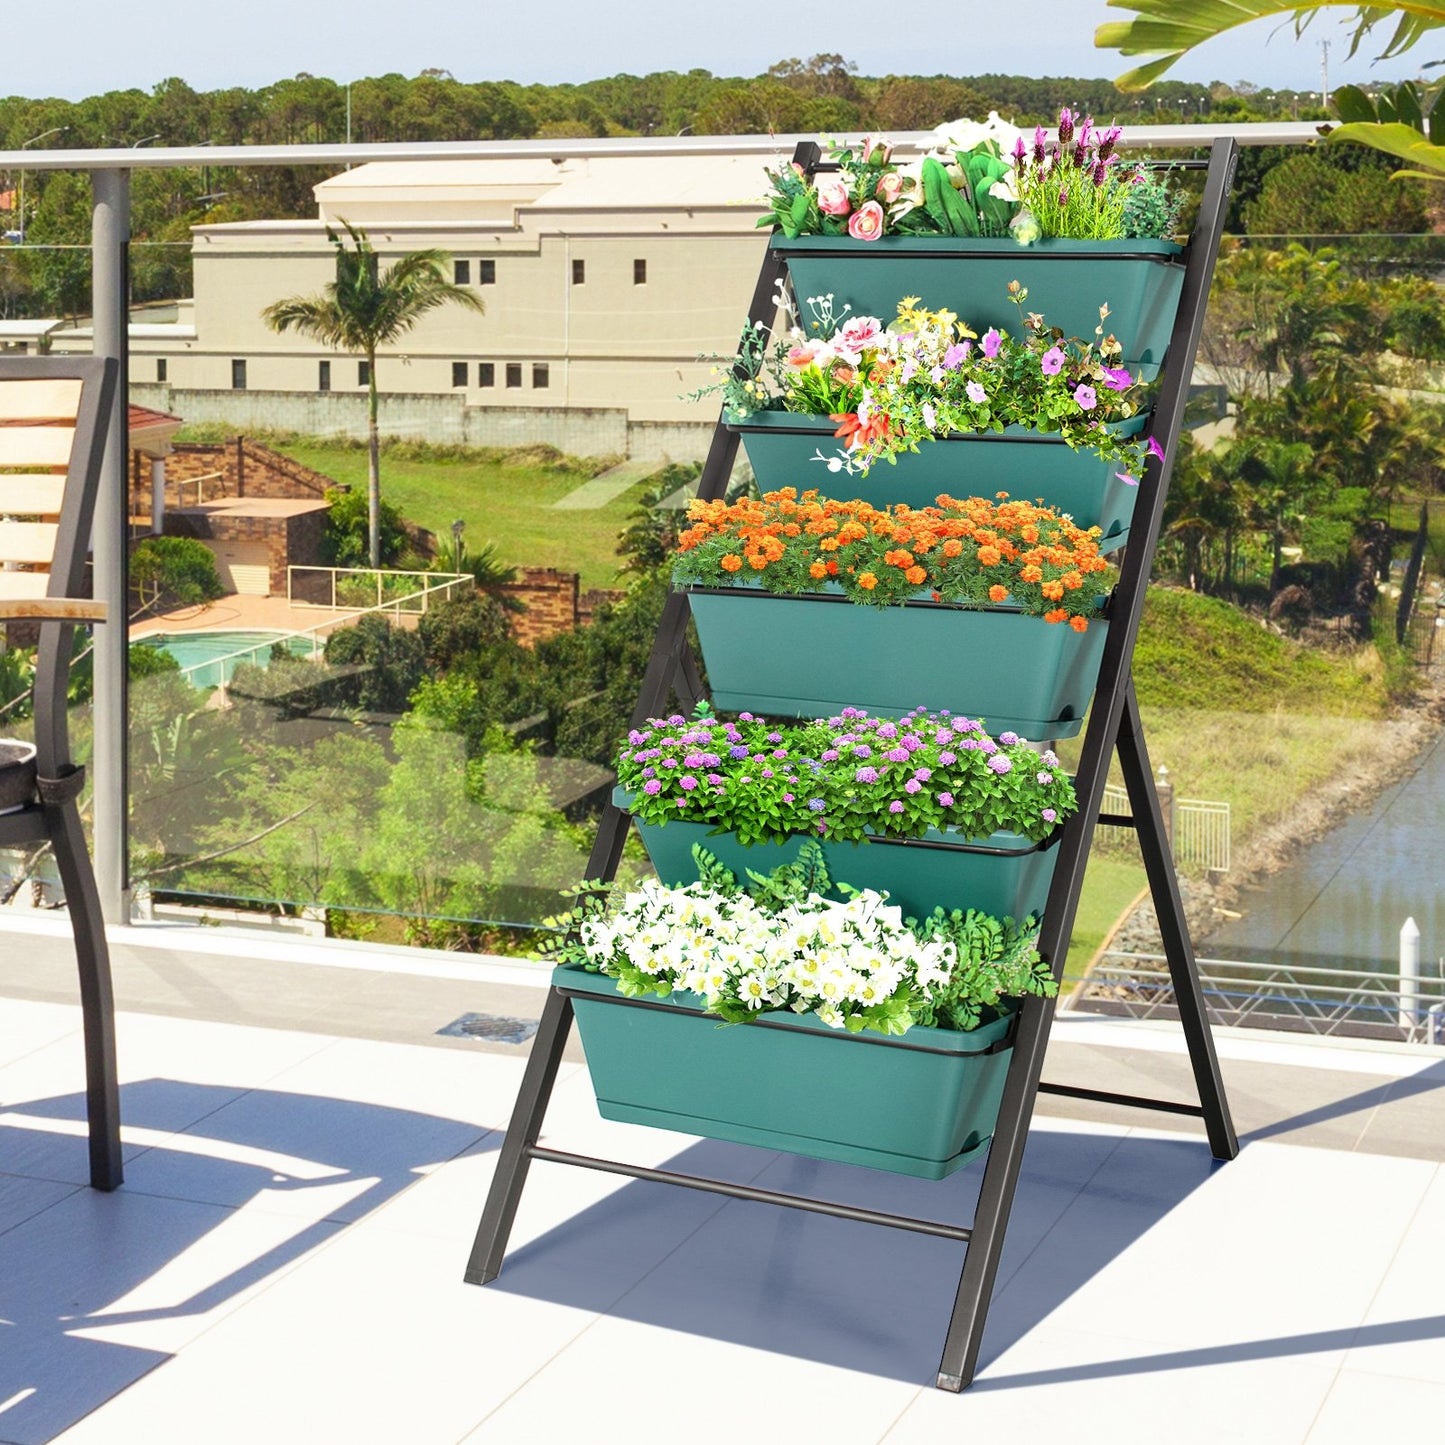 5-tier Vertical Garden Planter Box Elevated Raised Bed with 5 Container, Green - Gallery Canada